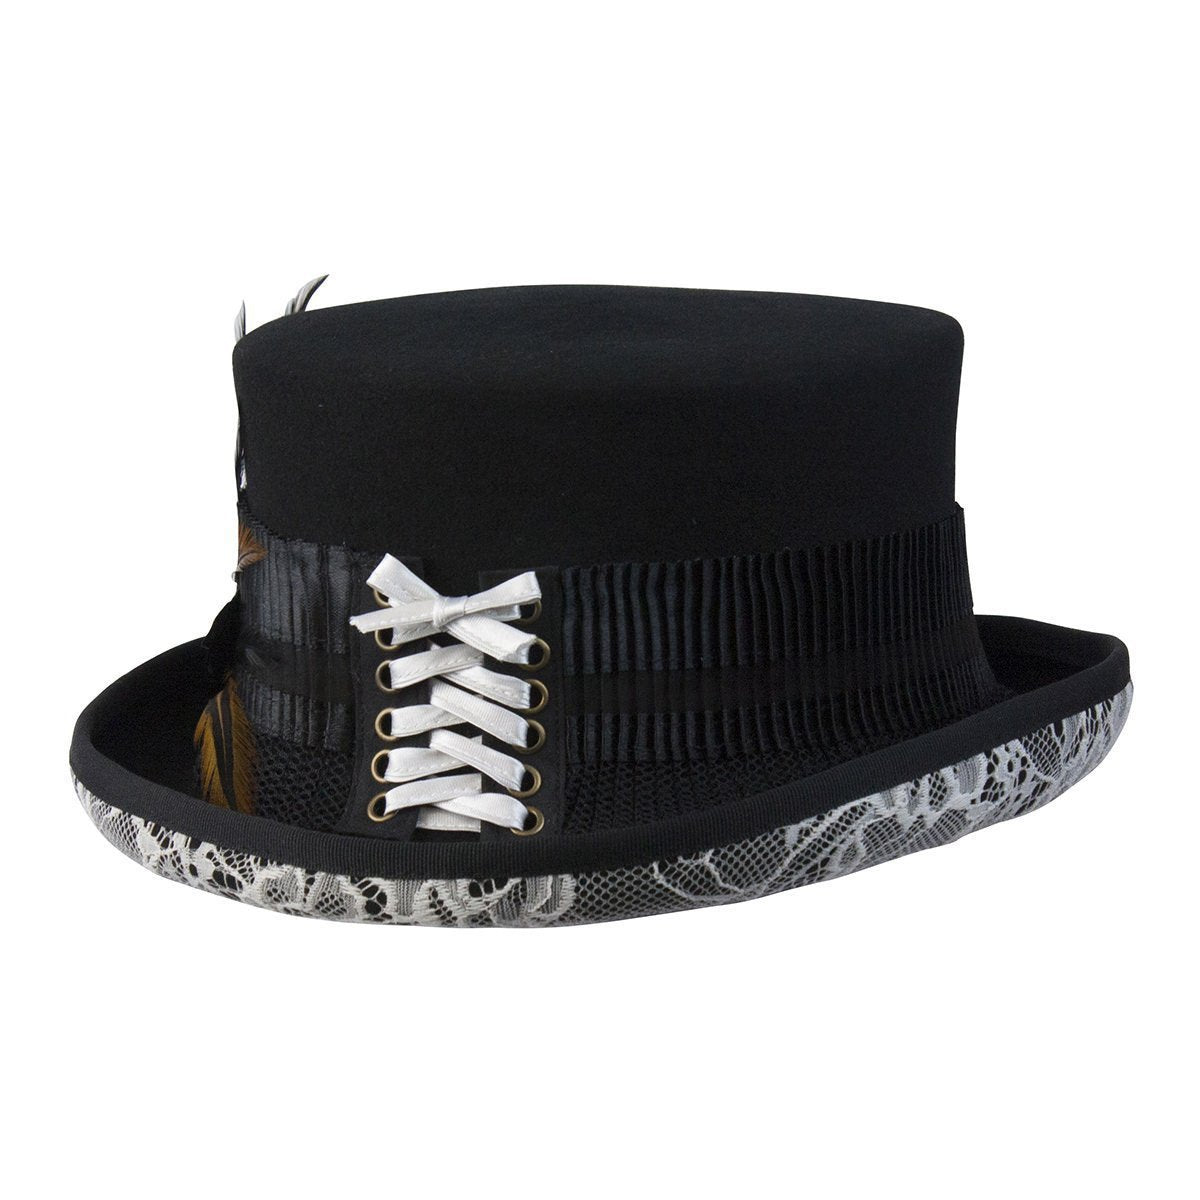 LIHUA 25cm (9.8 inch) Steampunk / Mad Hatter Top Hat Victorian